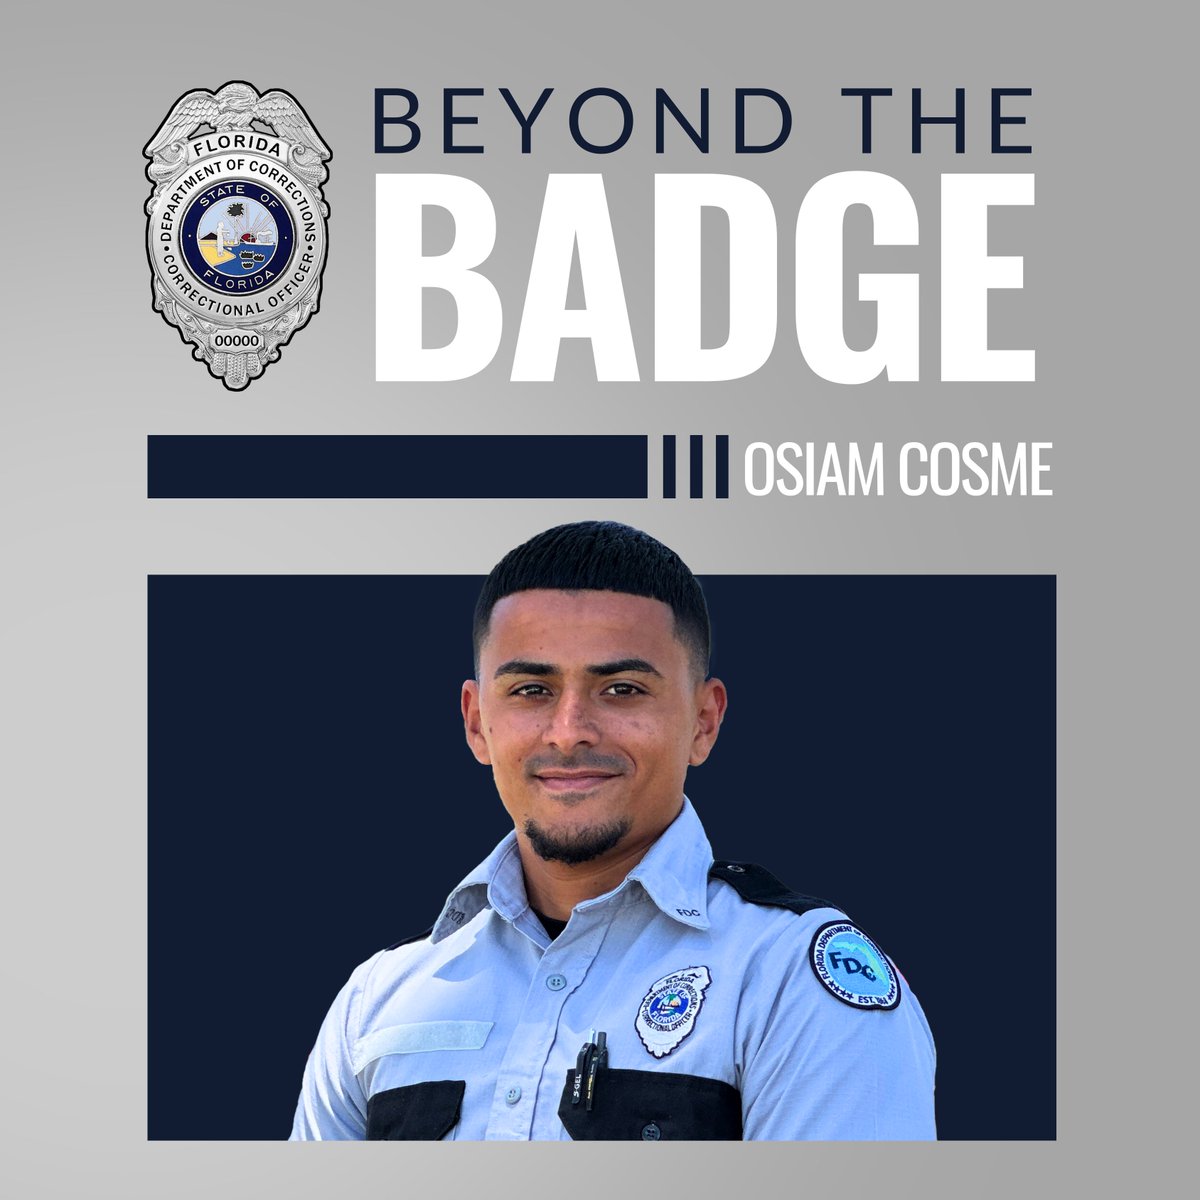 FDC congratulates Correctional Officer Osiam Cosme on receiving the United States Army Achievement Medal in recognition of his exceptional performance and unwavering commitment to duty while serving abroad. In the letter recognizing this achievement, Officer Cosme was commended